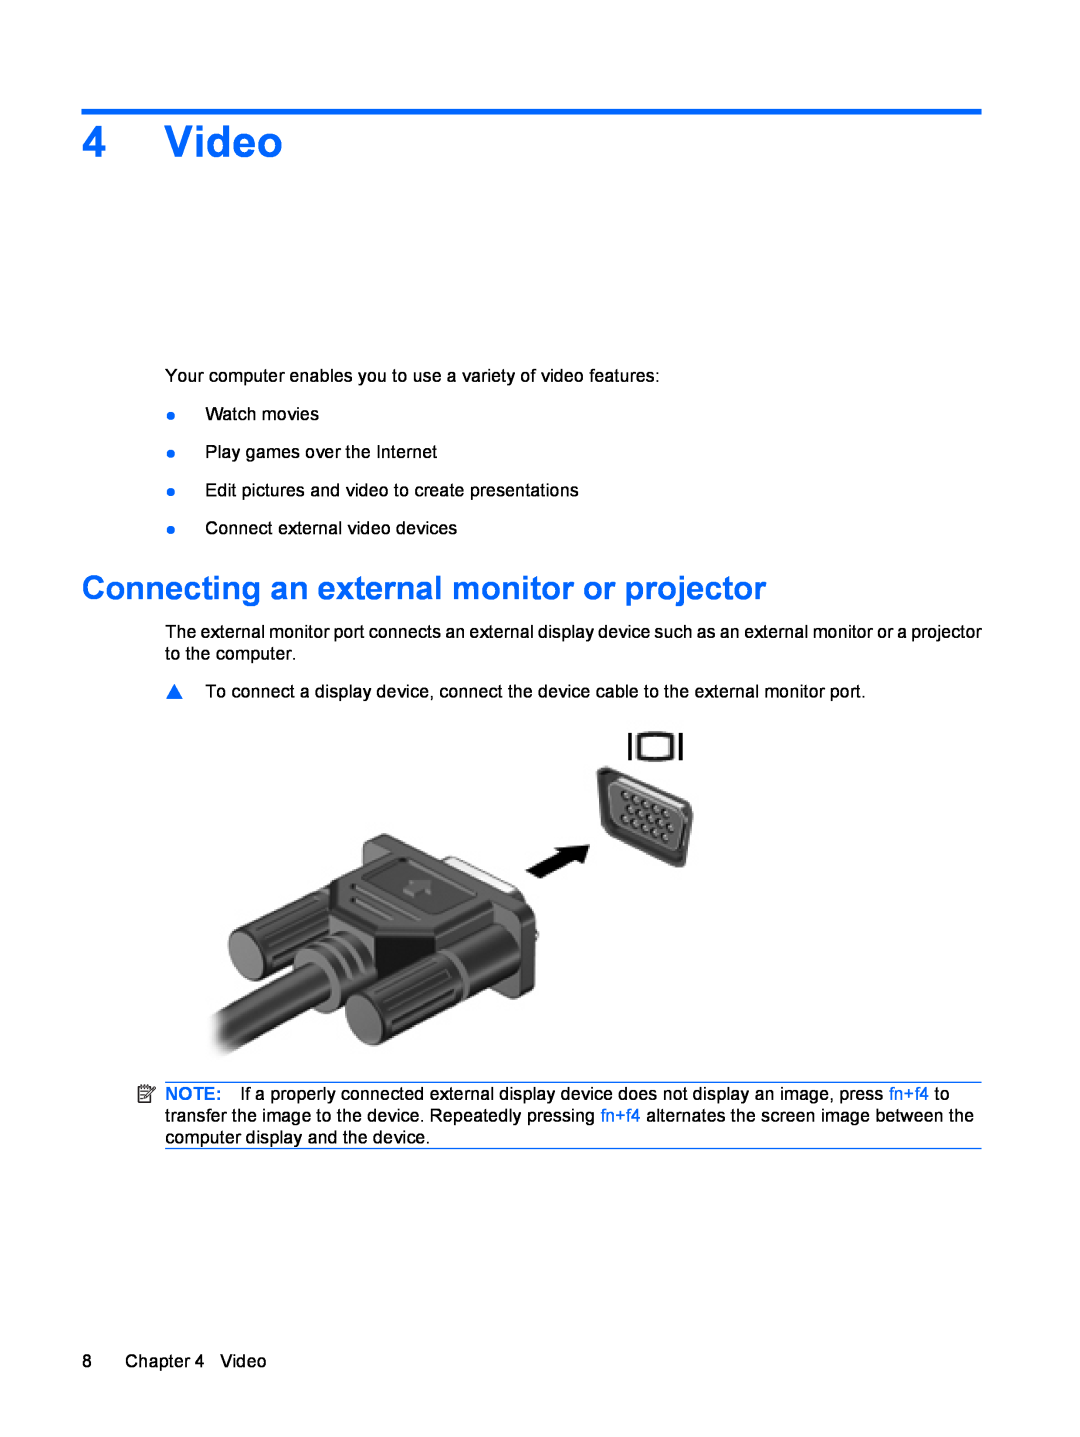 HP CQ61-412AX, CQ61-312TX, CQ61-313AX, CQ61-311TU, CQ61-312SL, CQ61-307AU Video, Connecting an external monitor or projector 